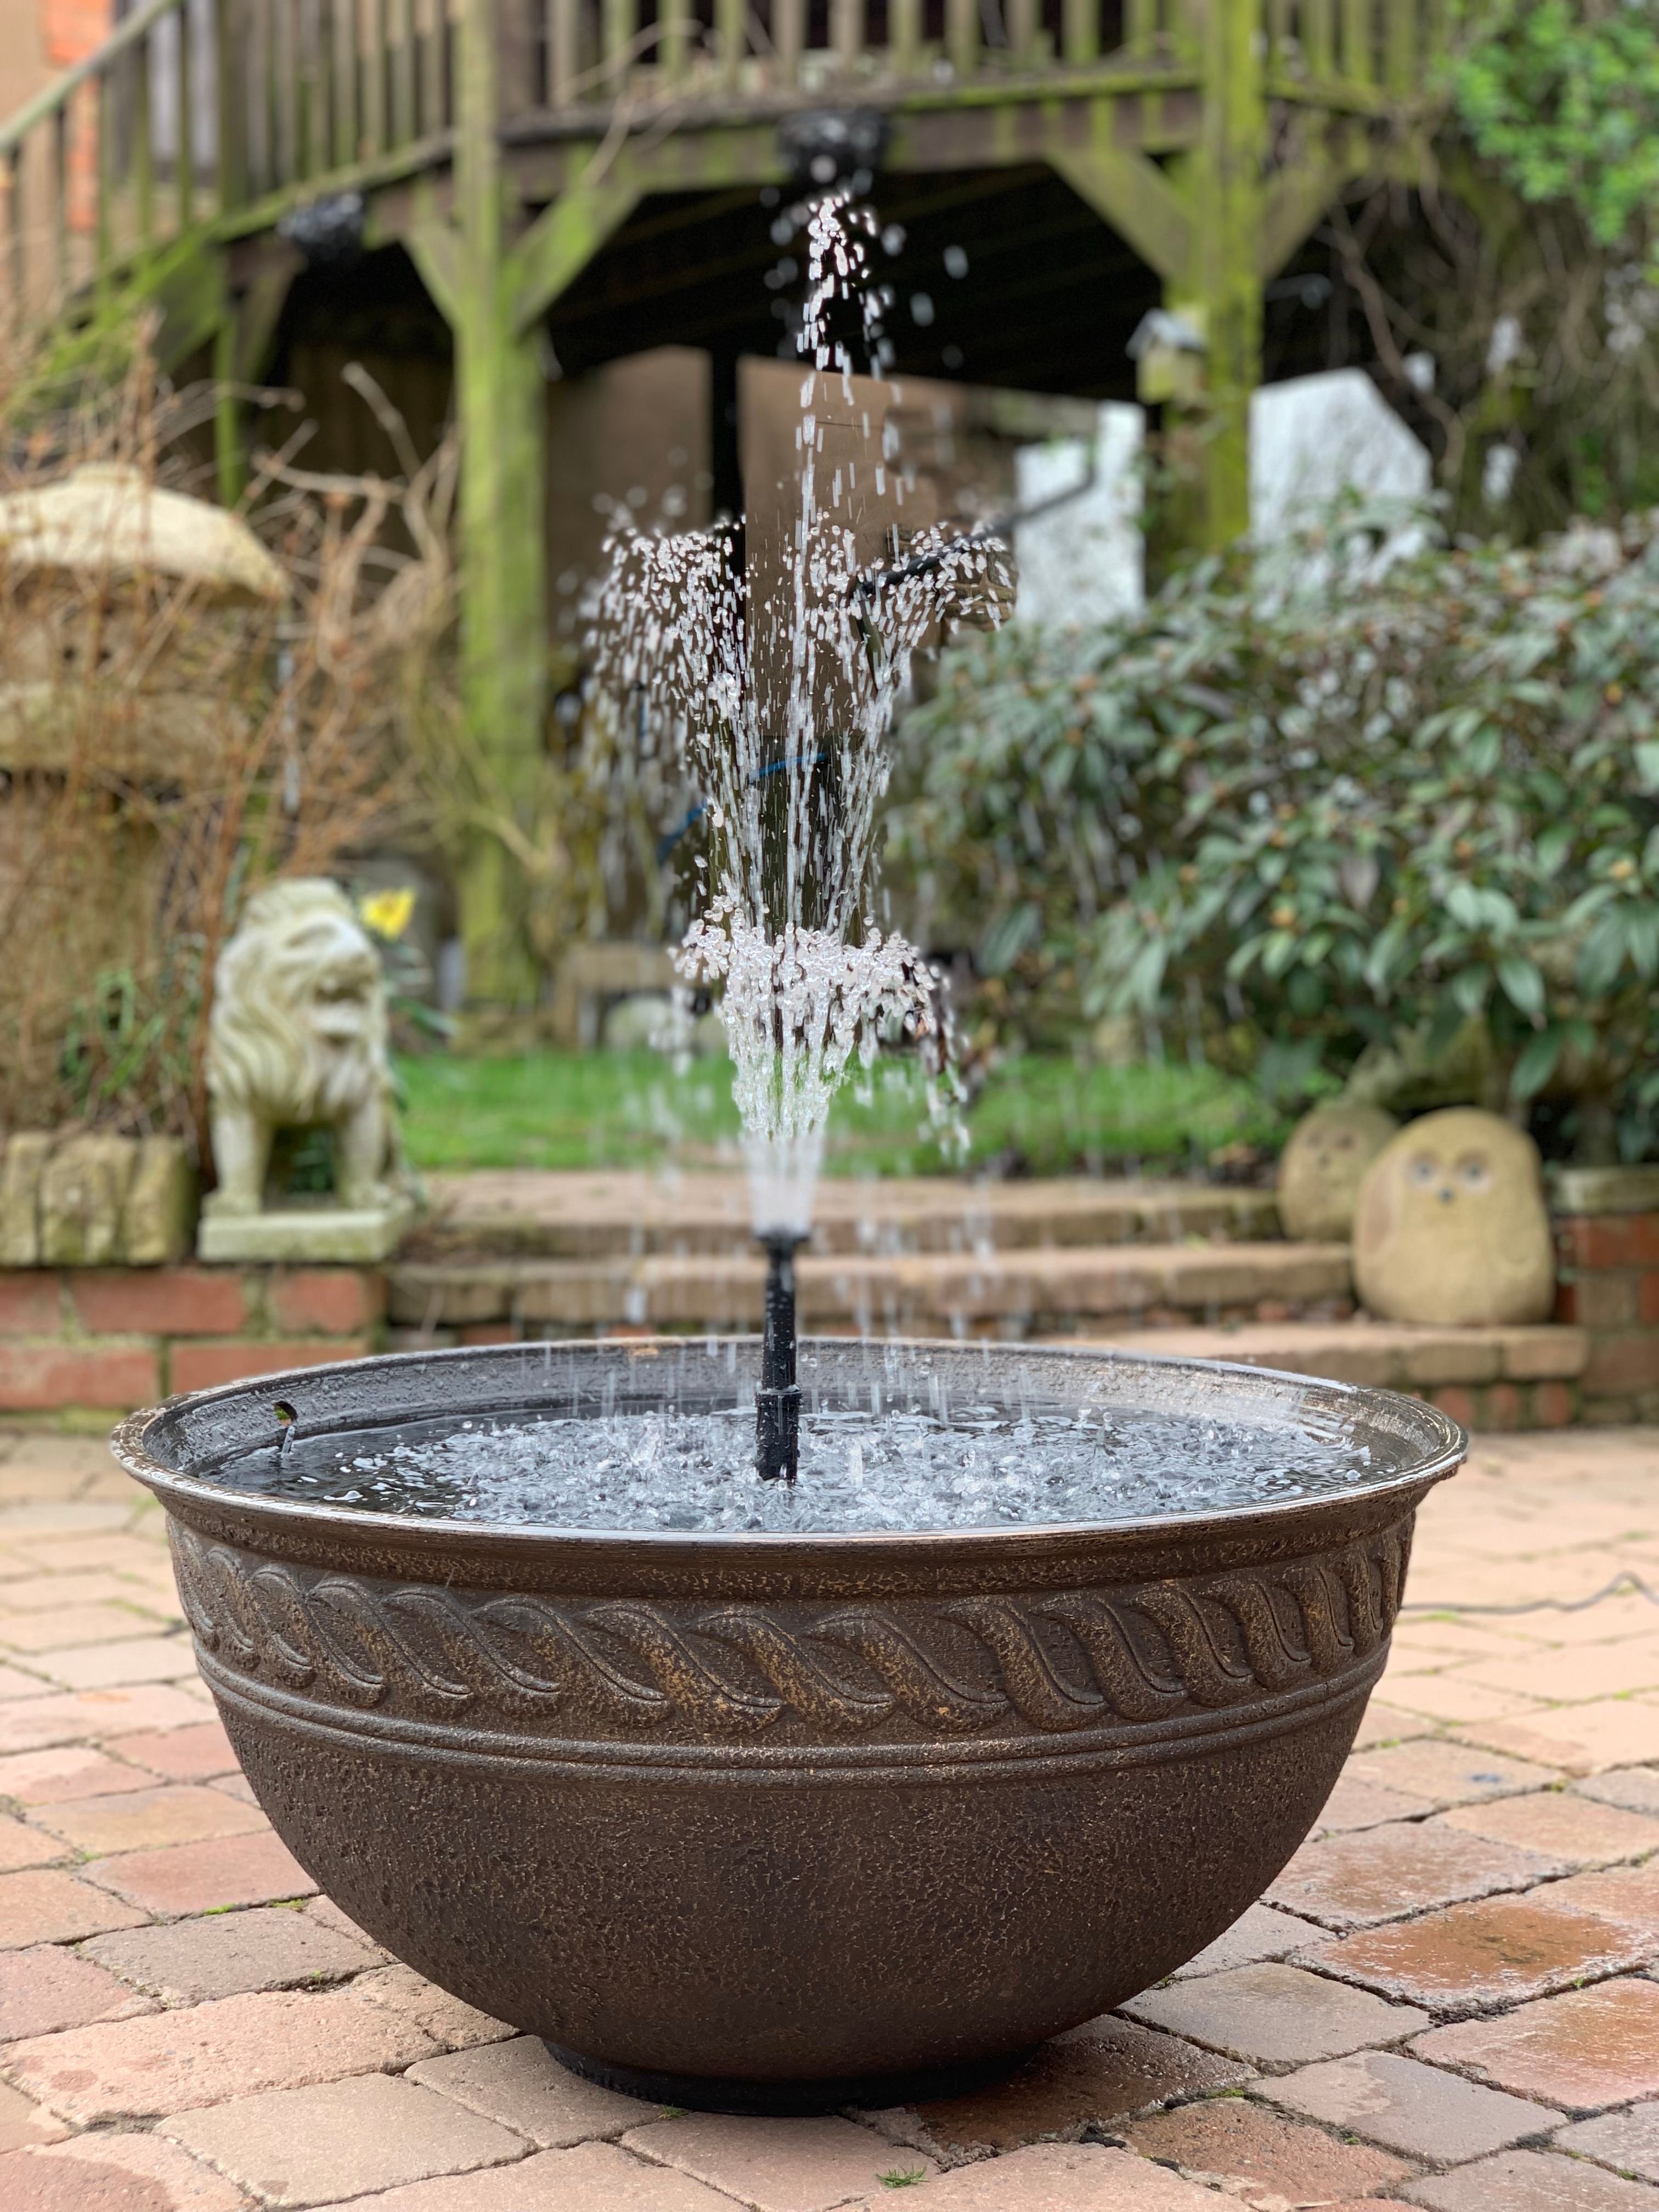 EC lotus bowl fountain made in half stone powder and half recycled PP